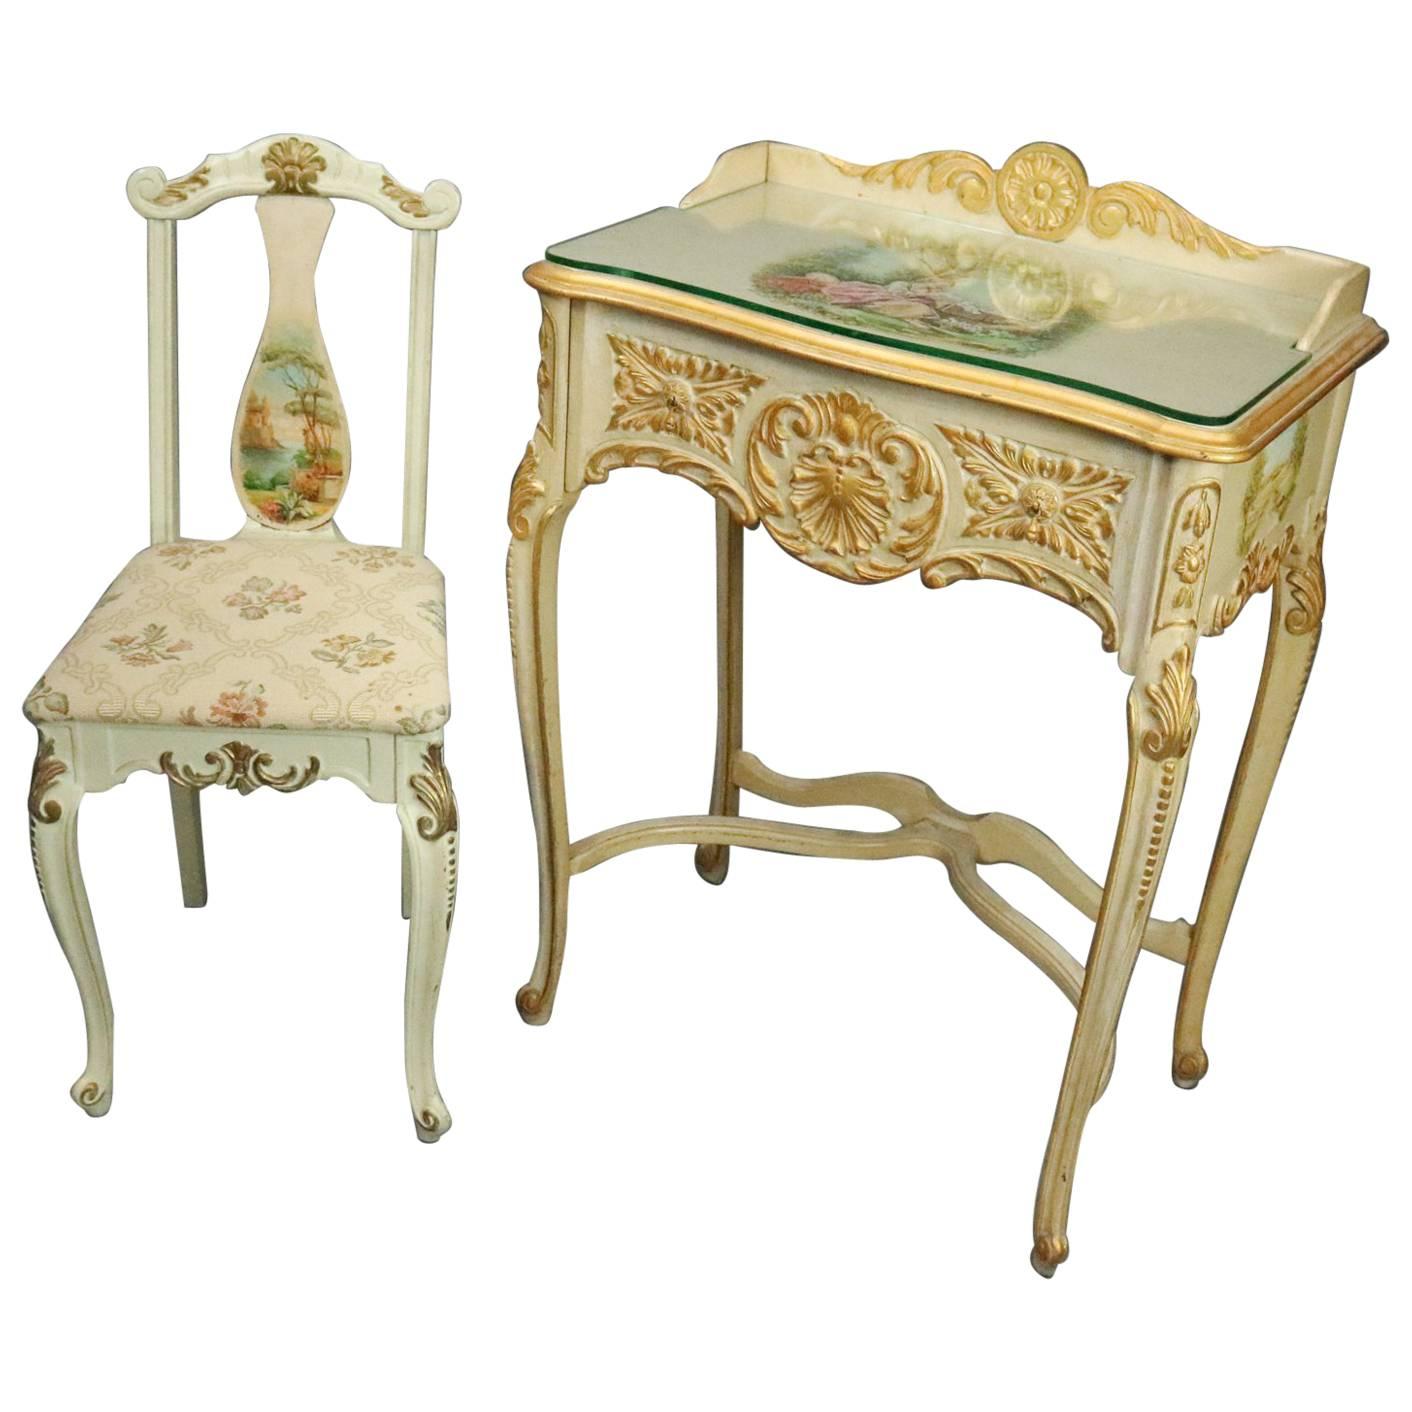 Antique French Provincial Vernis Martin Painted Lady's Desk and Chair, c1880